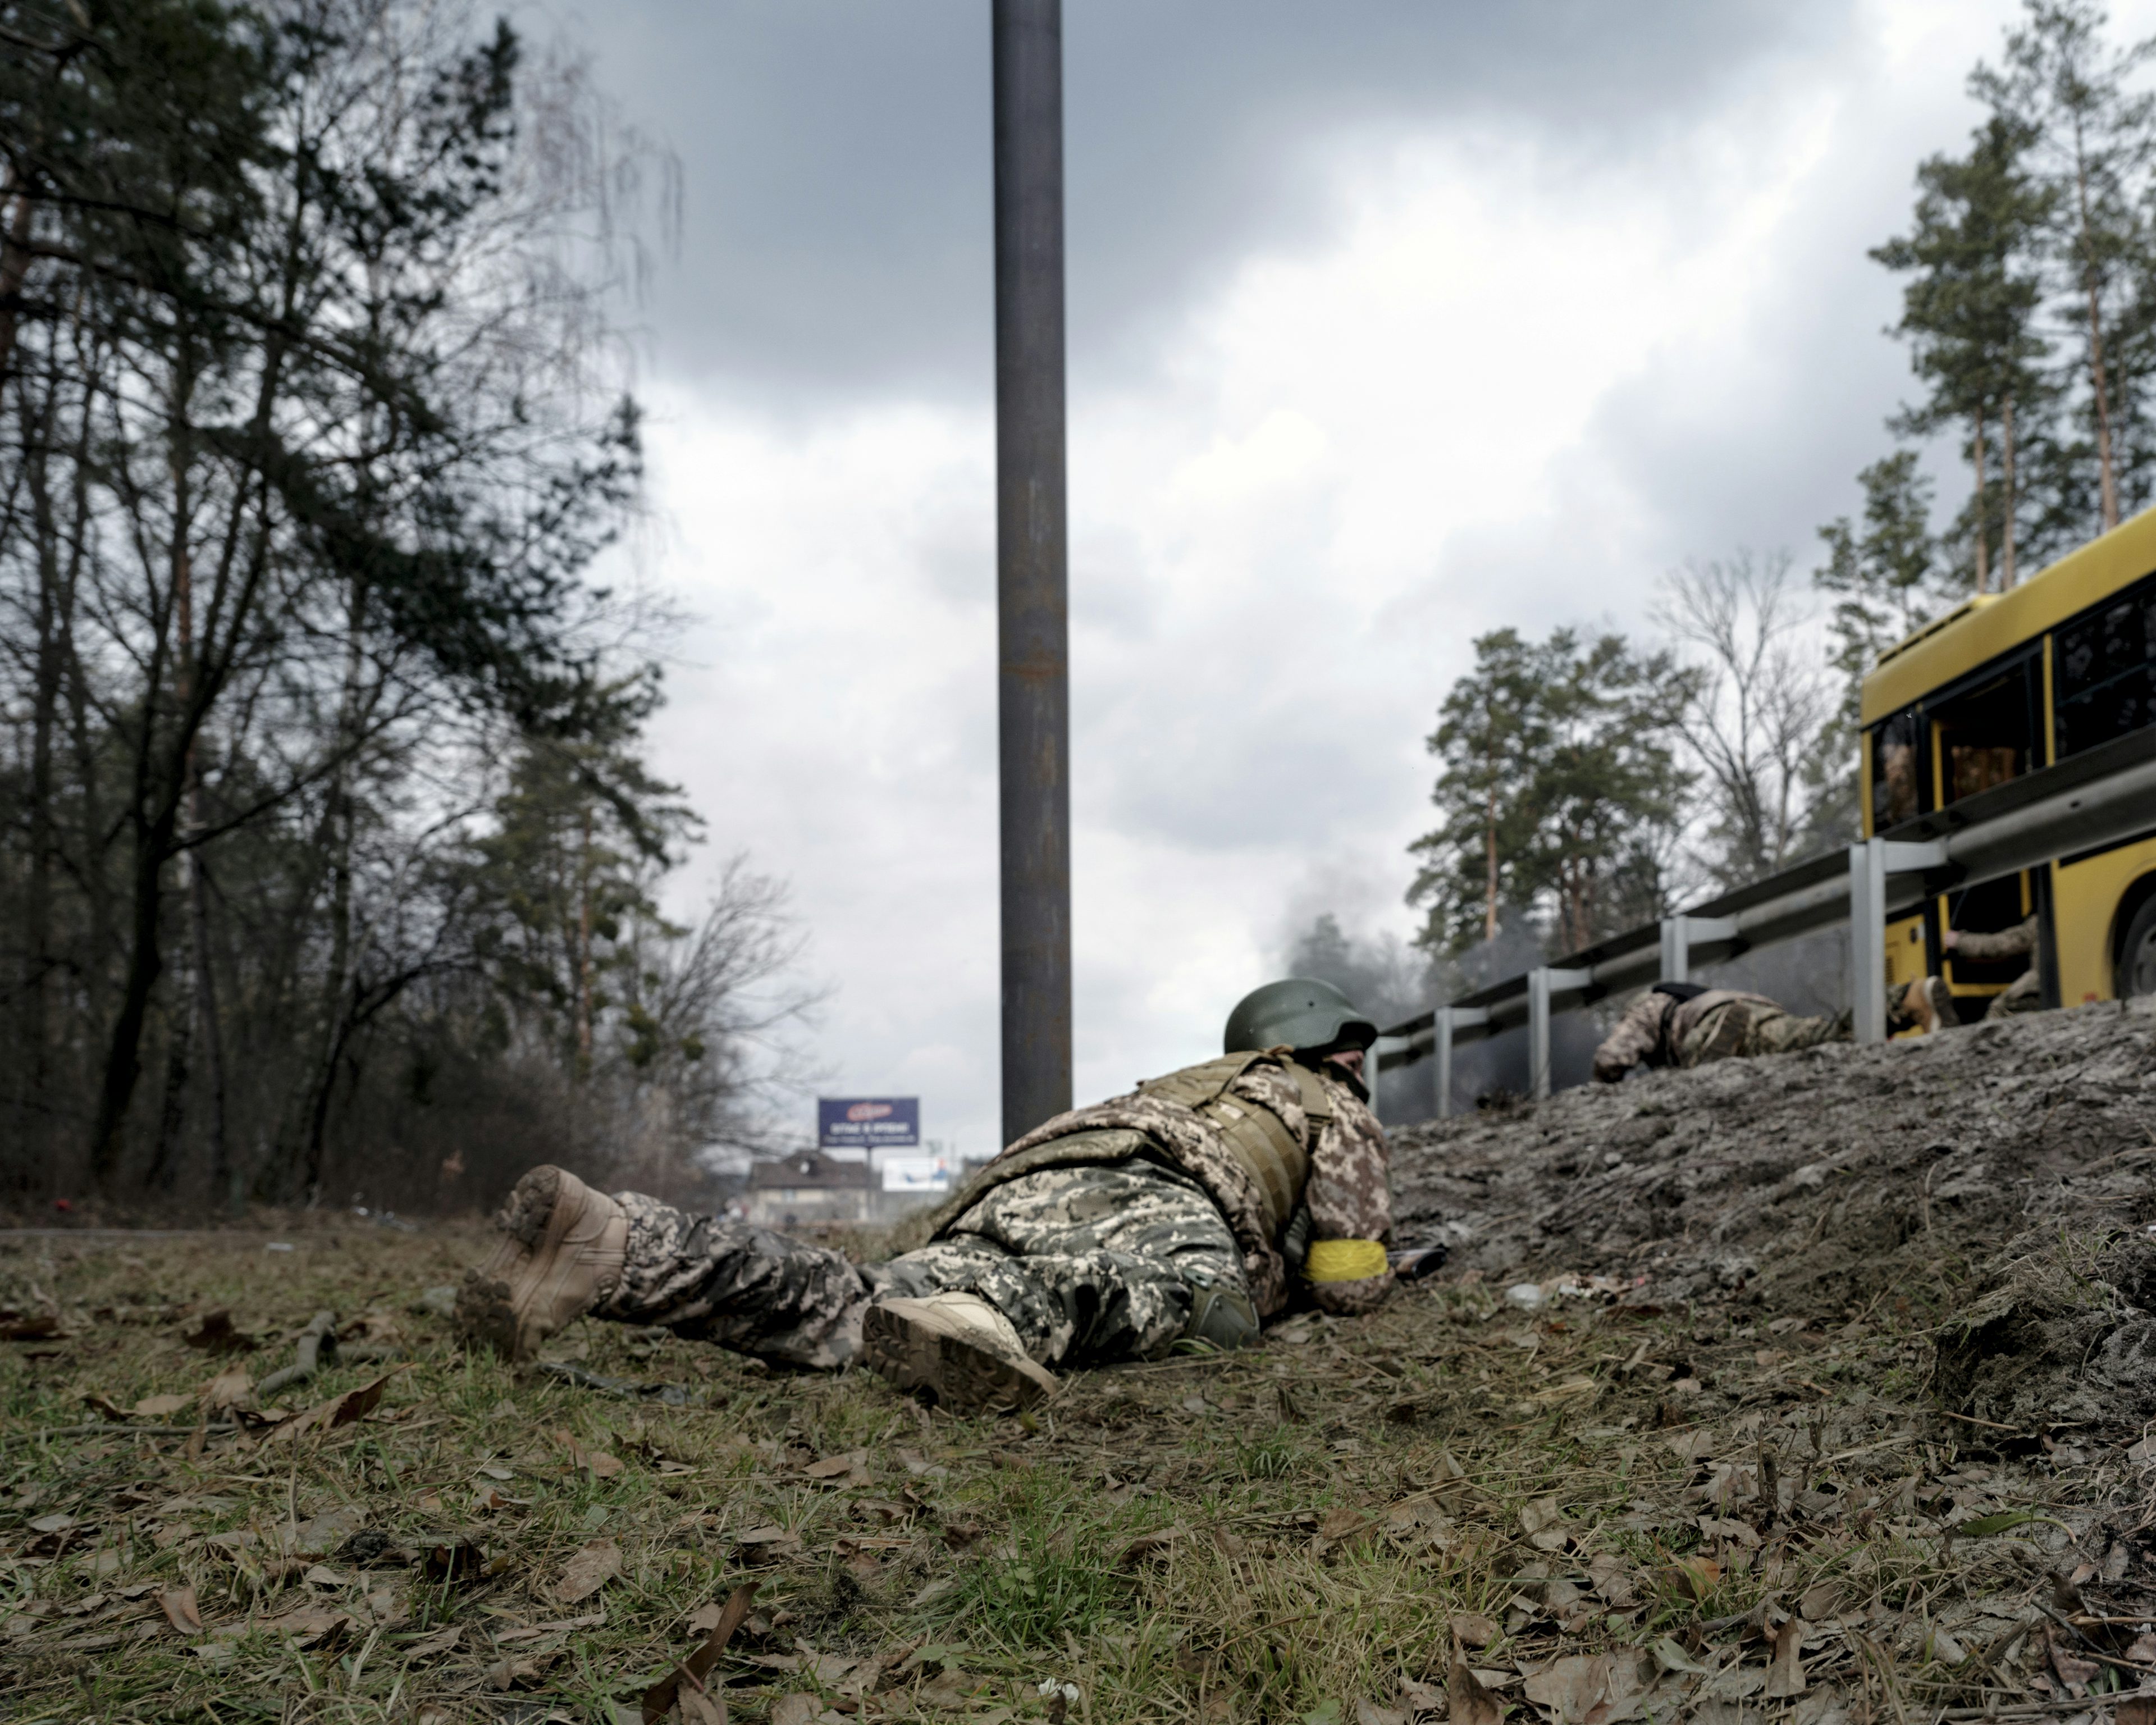 UKRAINE. Irpin outskirts. 6 March 2022. During an evacuation of civilians from Irpin, the Russian army fires artillery shells. A soldier throws himself to the ground to protect himself from the shrapnel. Photo by Lorenzo Meloni